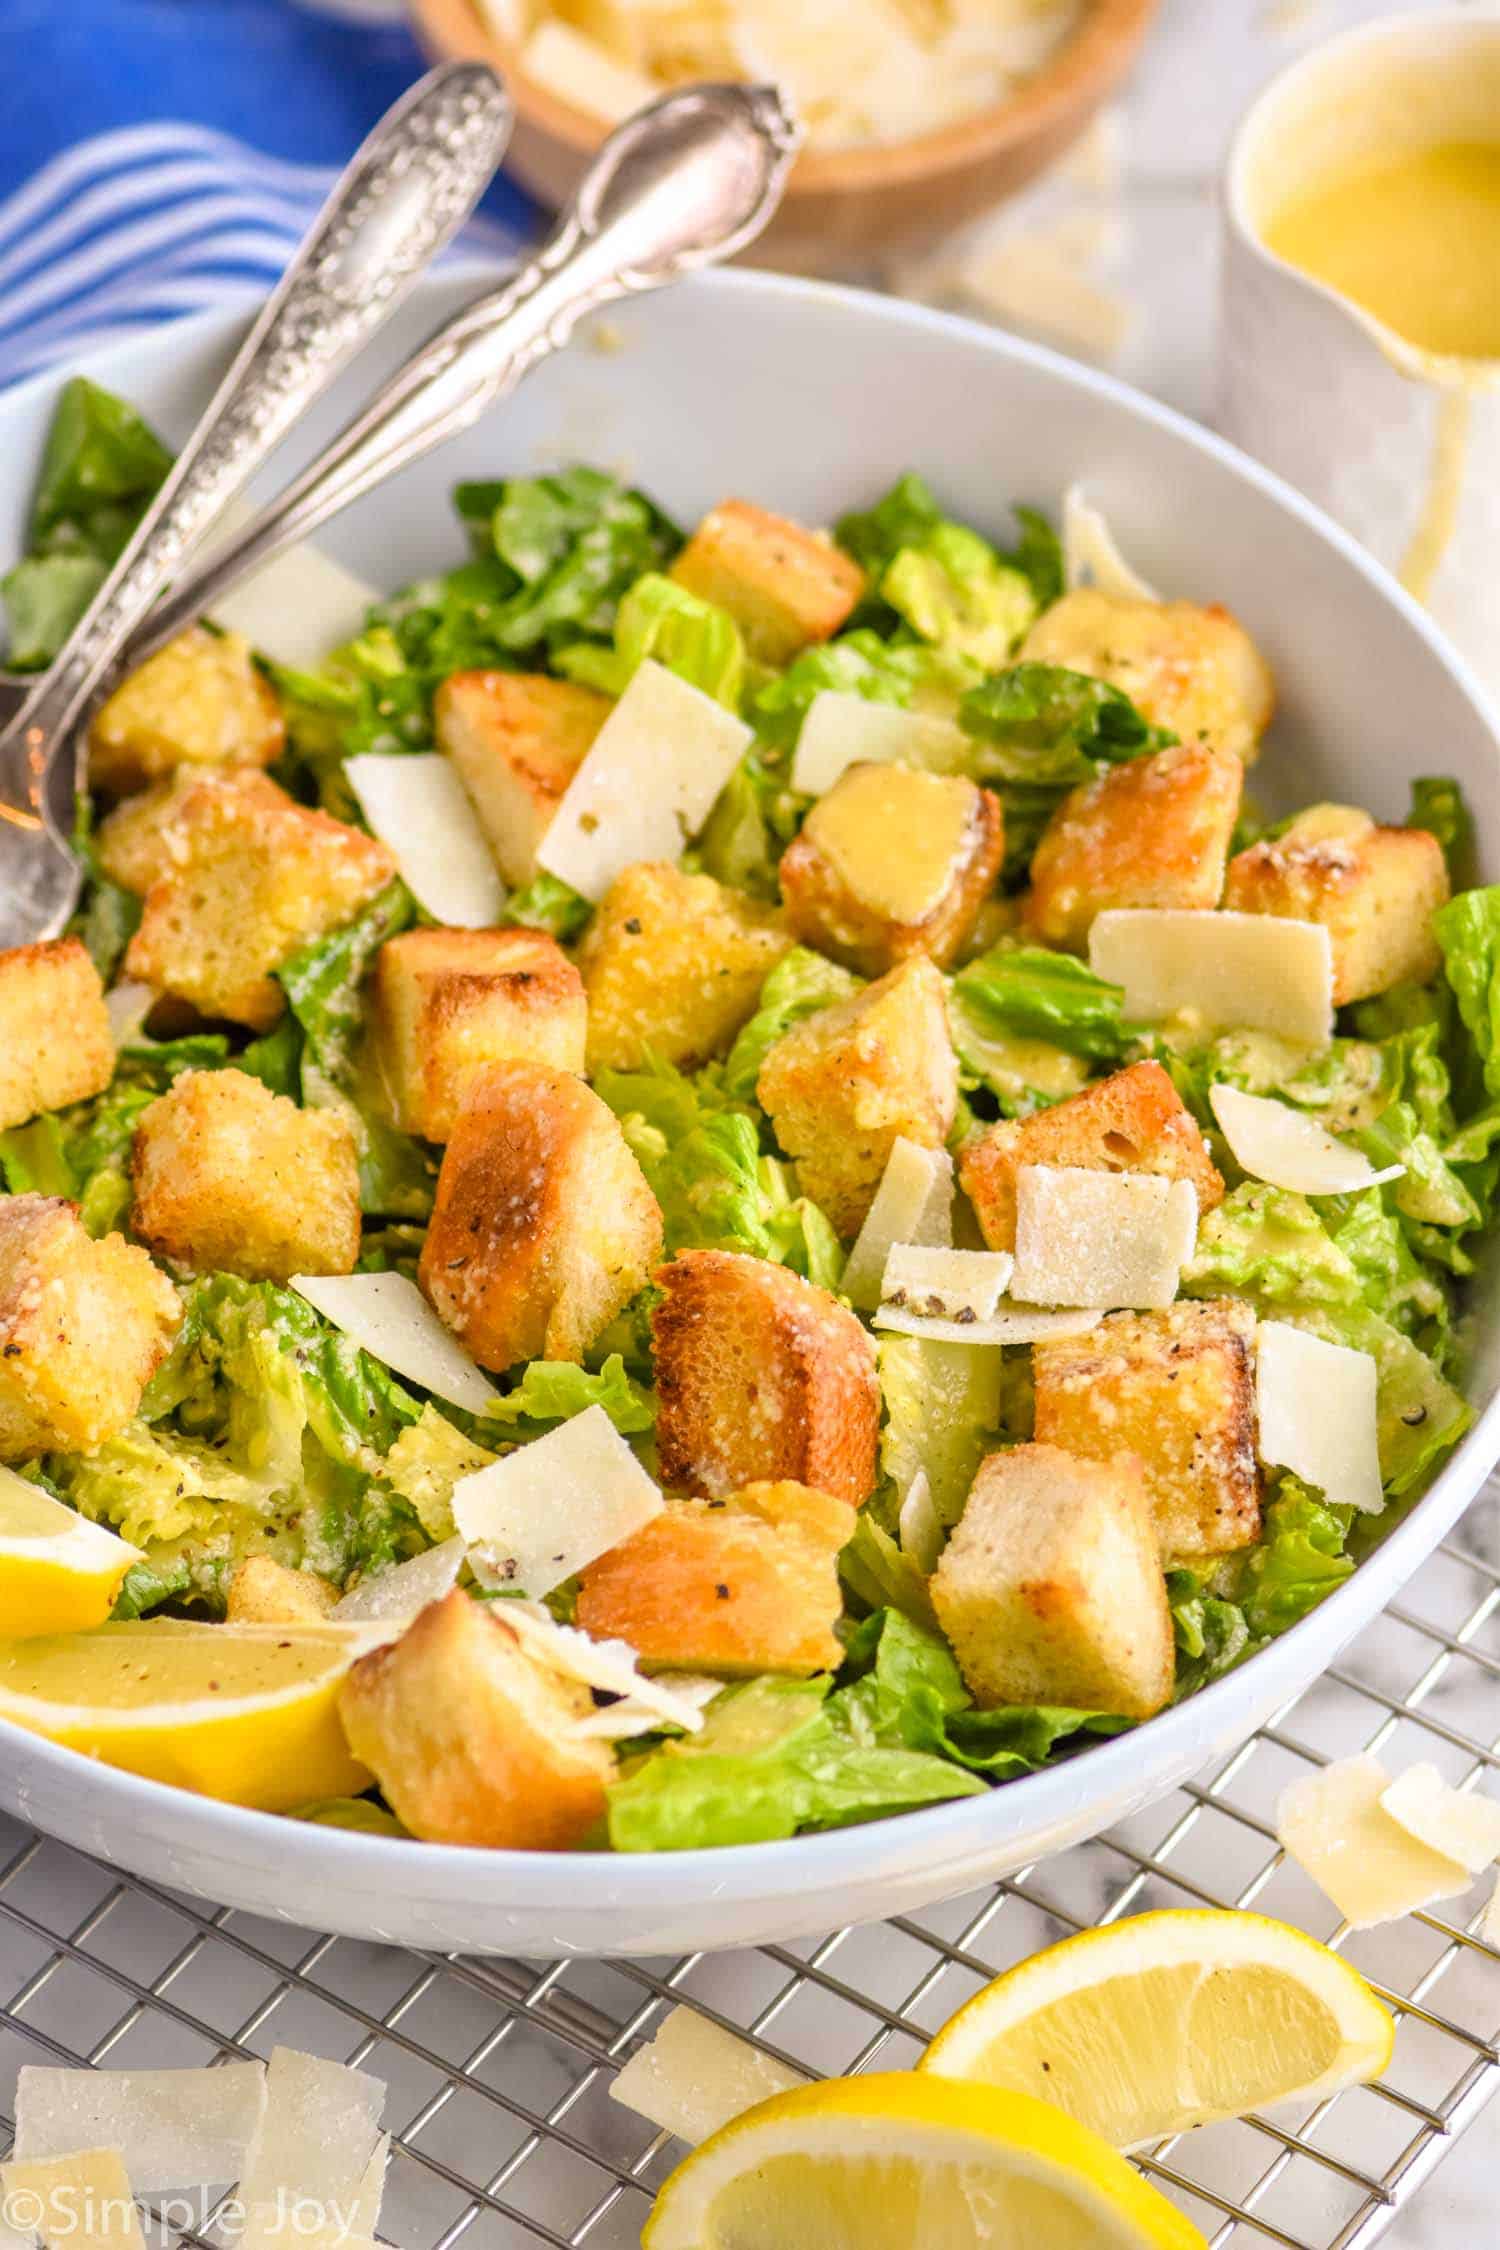 side view of a Caesar salad in a bowl with large croutons and peels of Parmesan cheese